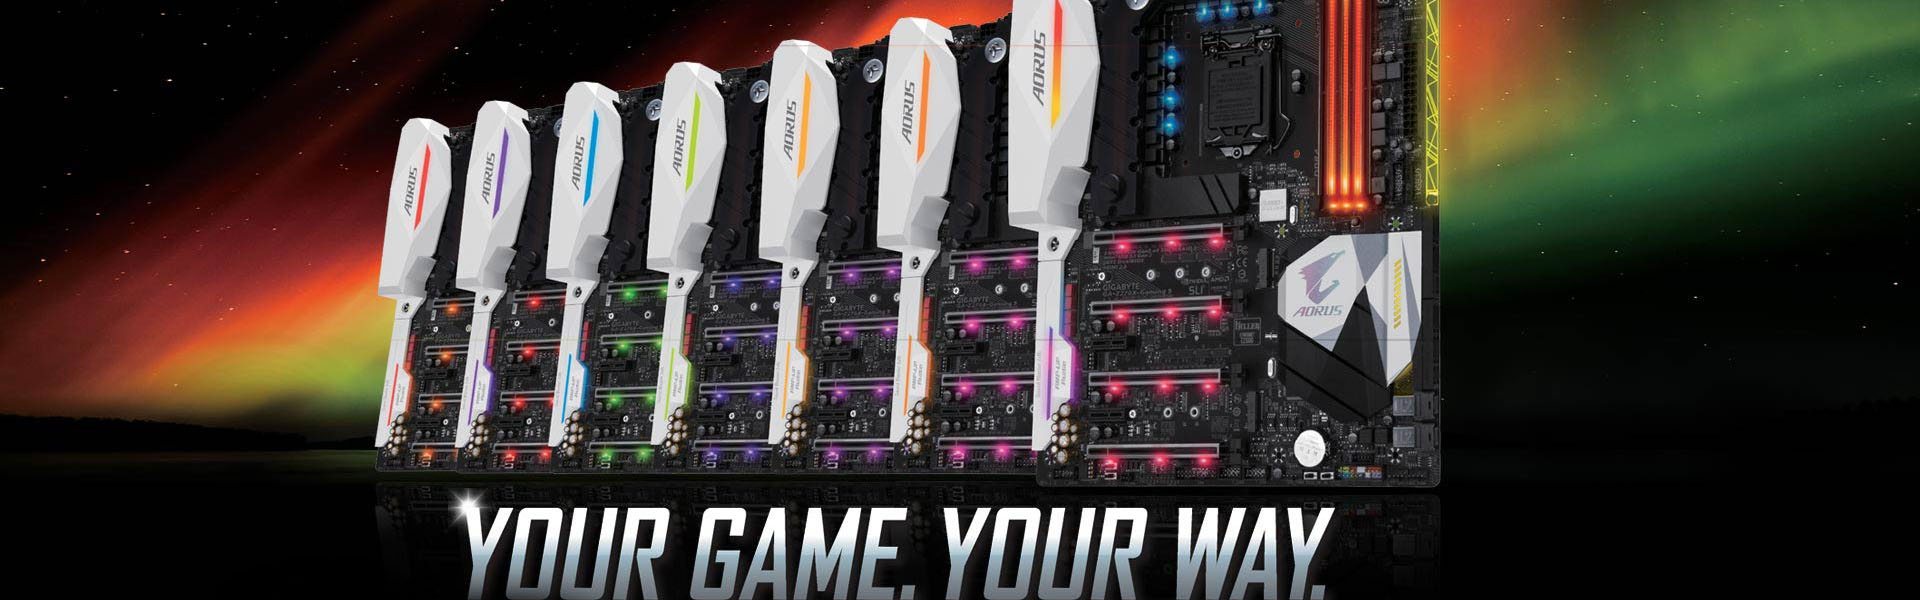 GIGABYTE Launches New AORUS Gaming Motherboards 9